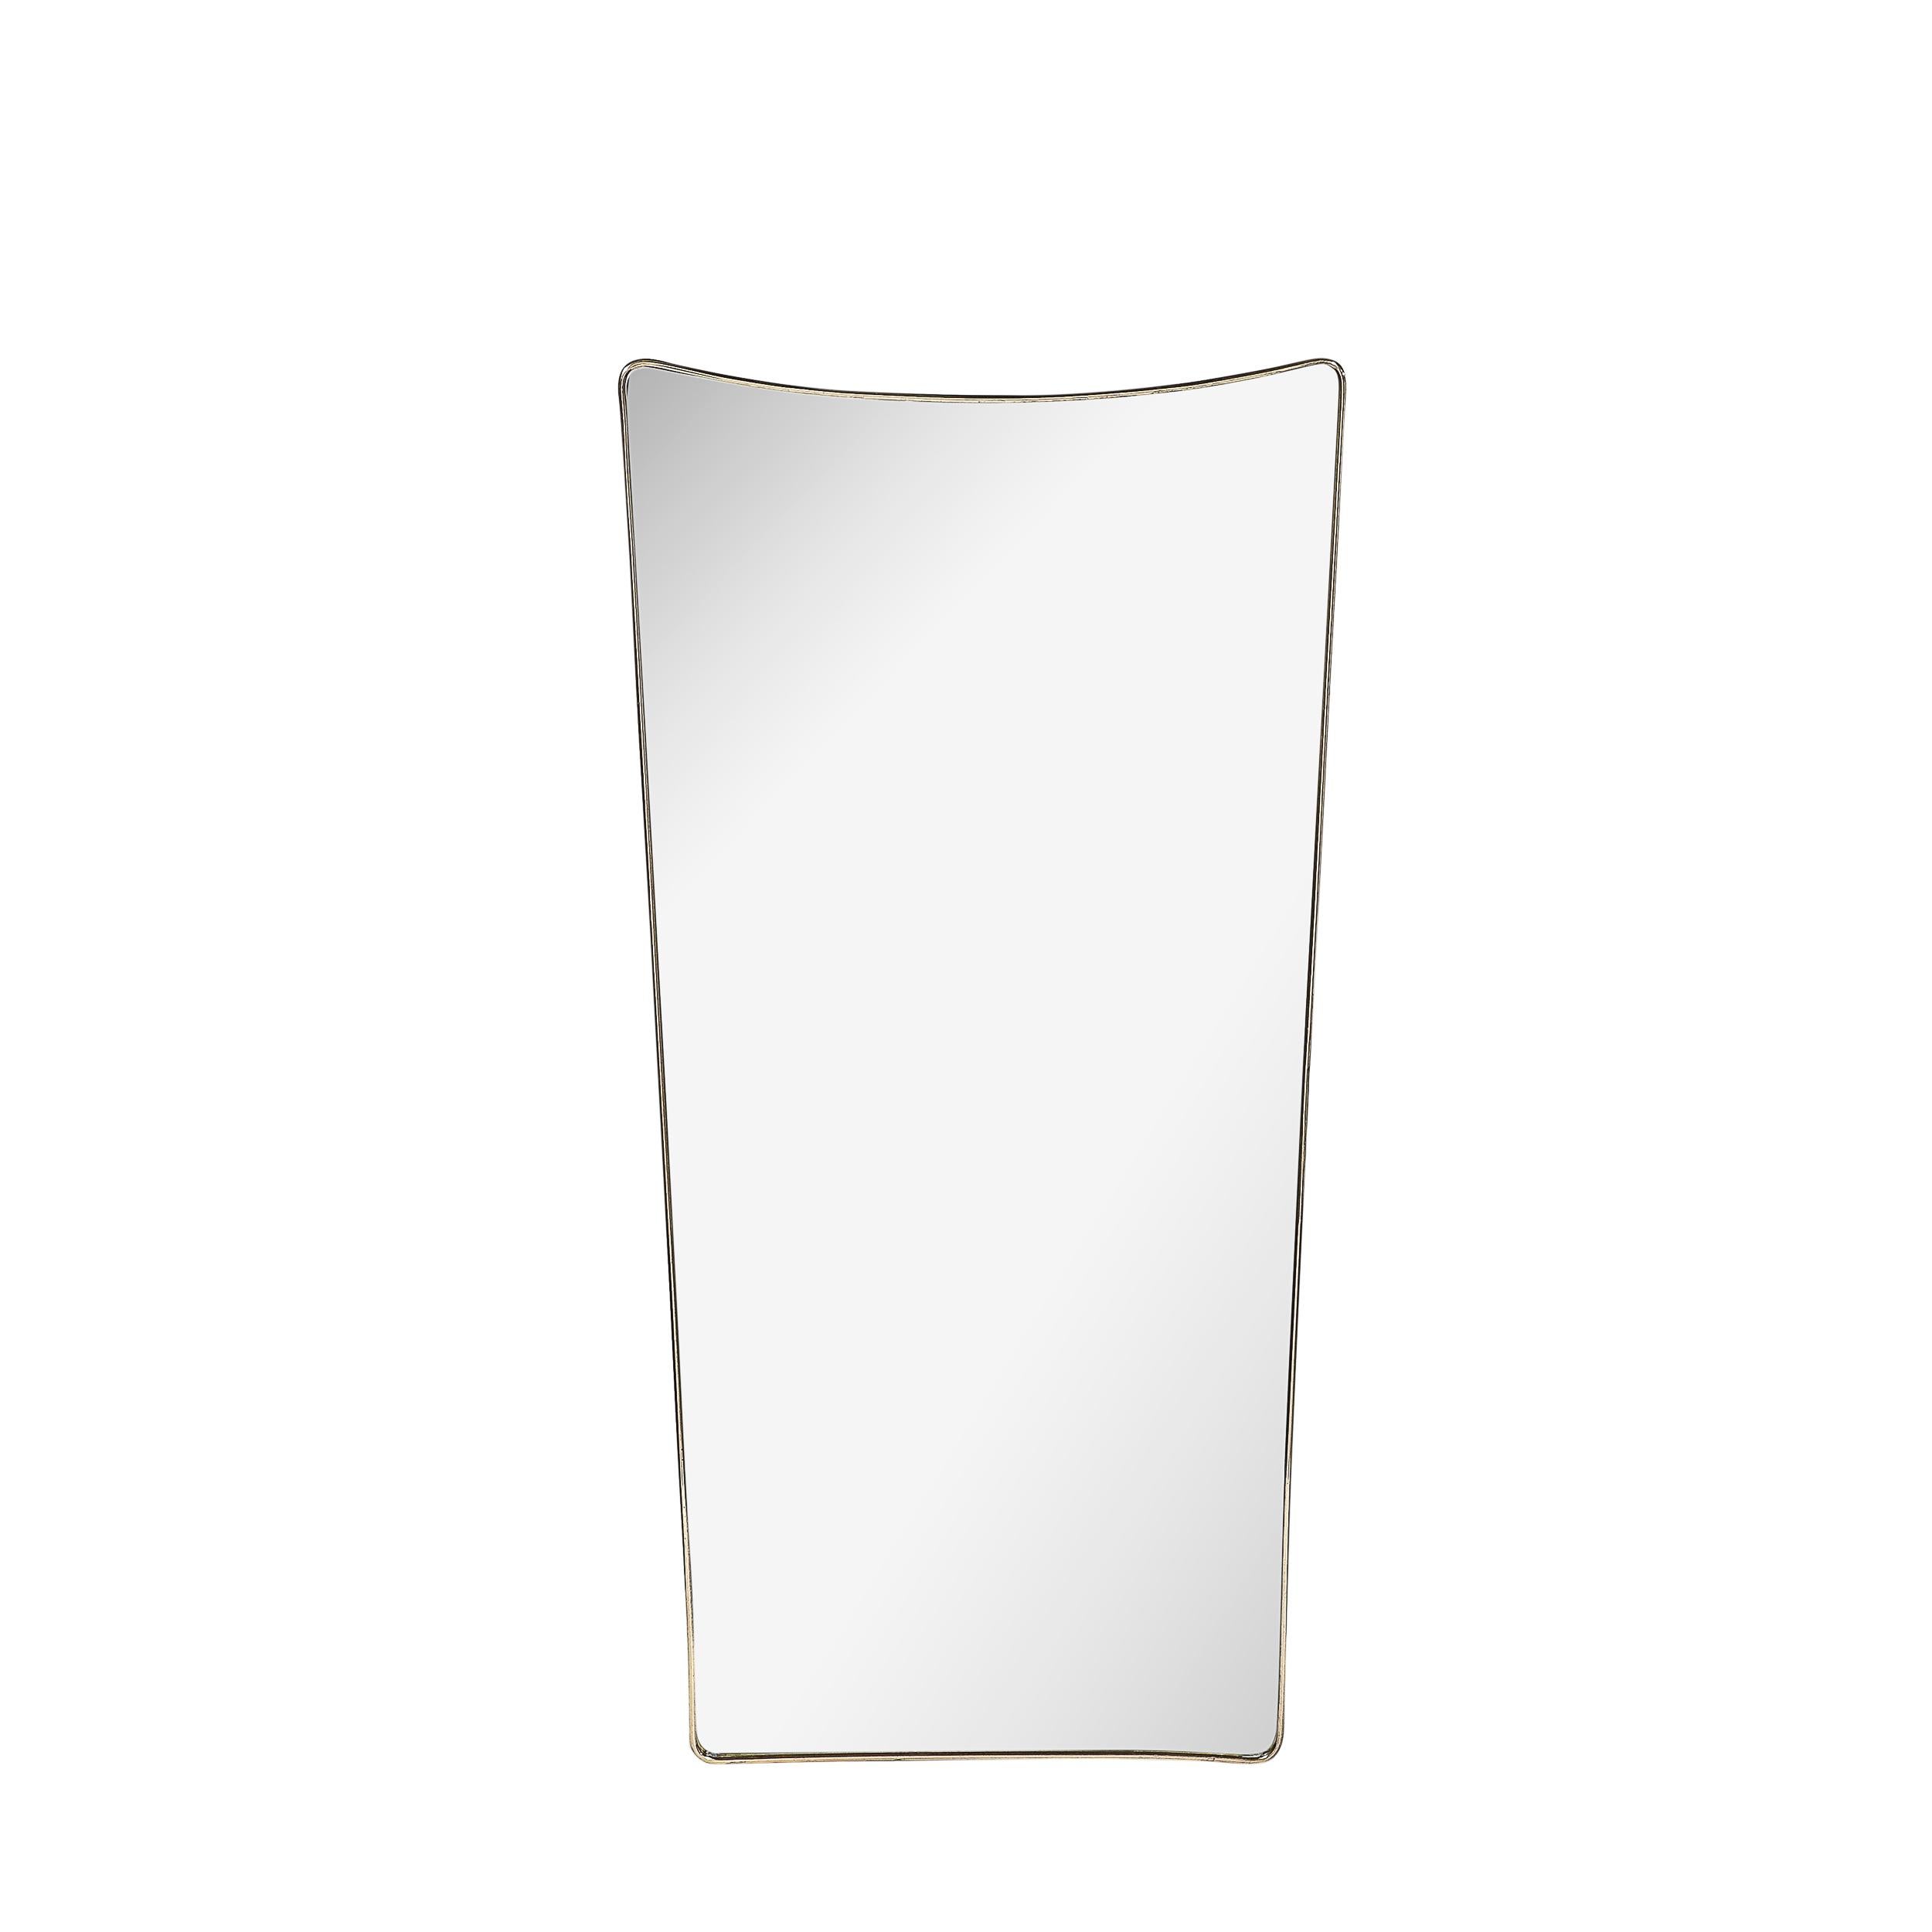 This minimal and beautifully made Mid-Century Modernist Tapered Brass Wrapped Mirror with Concave Top Detailing originates from Italy, Circa 1960. Features a stunning tapered silhouette with rounded top corners and a subtly tapered sides with a flat